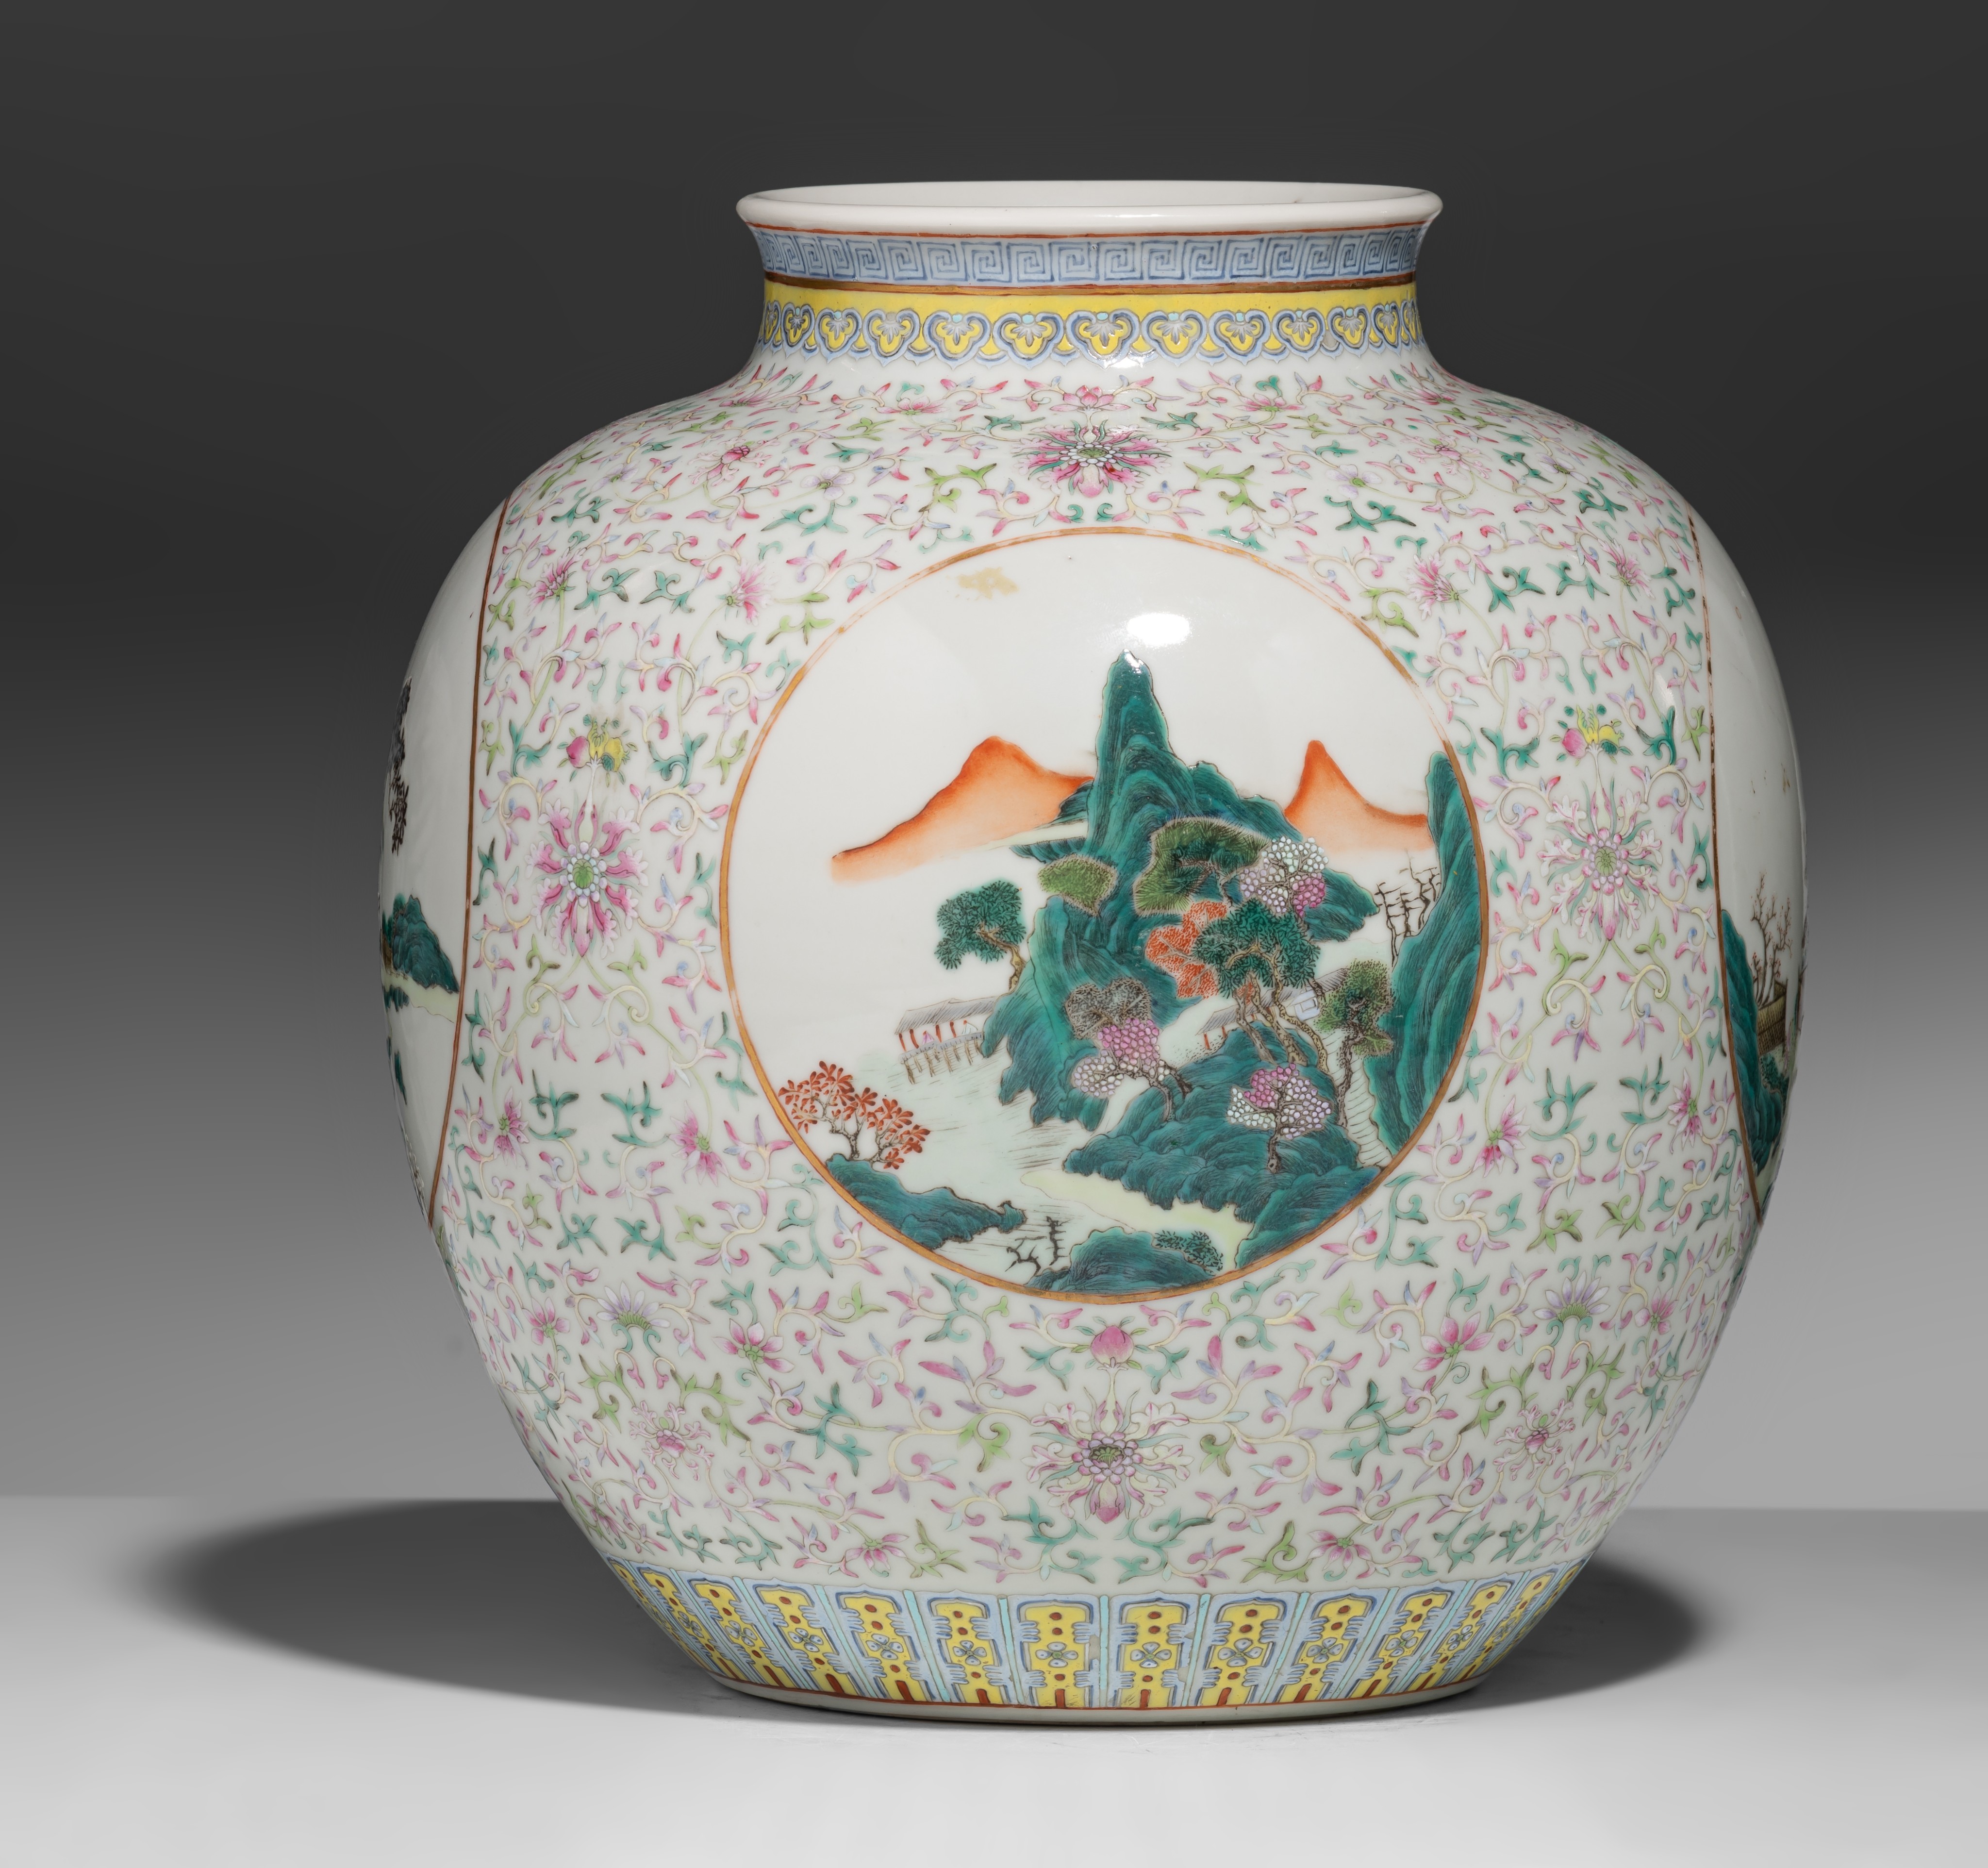 A Chinese famille rose 'Lotus scroll' zun vase, with a Qianlong mark, 19thC, H 25 - ø 23 cm - Image 2 of 8